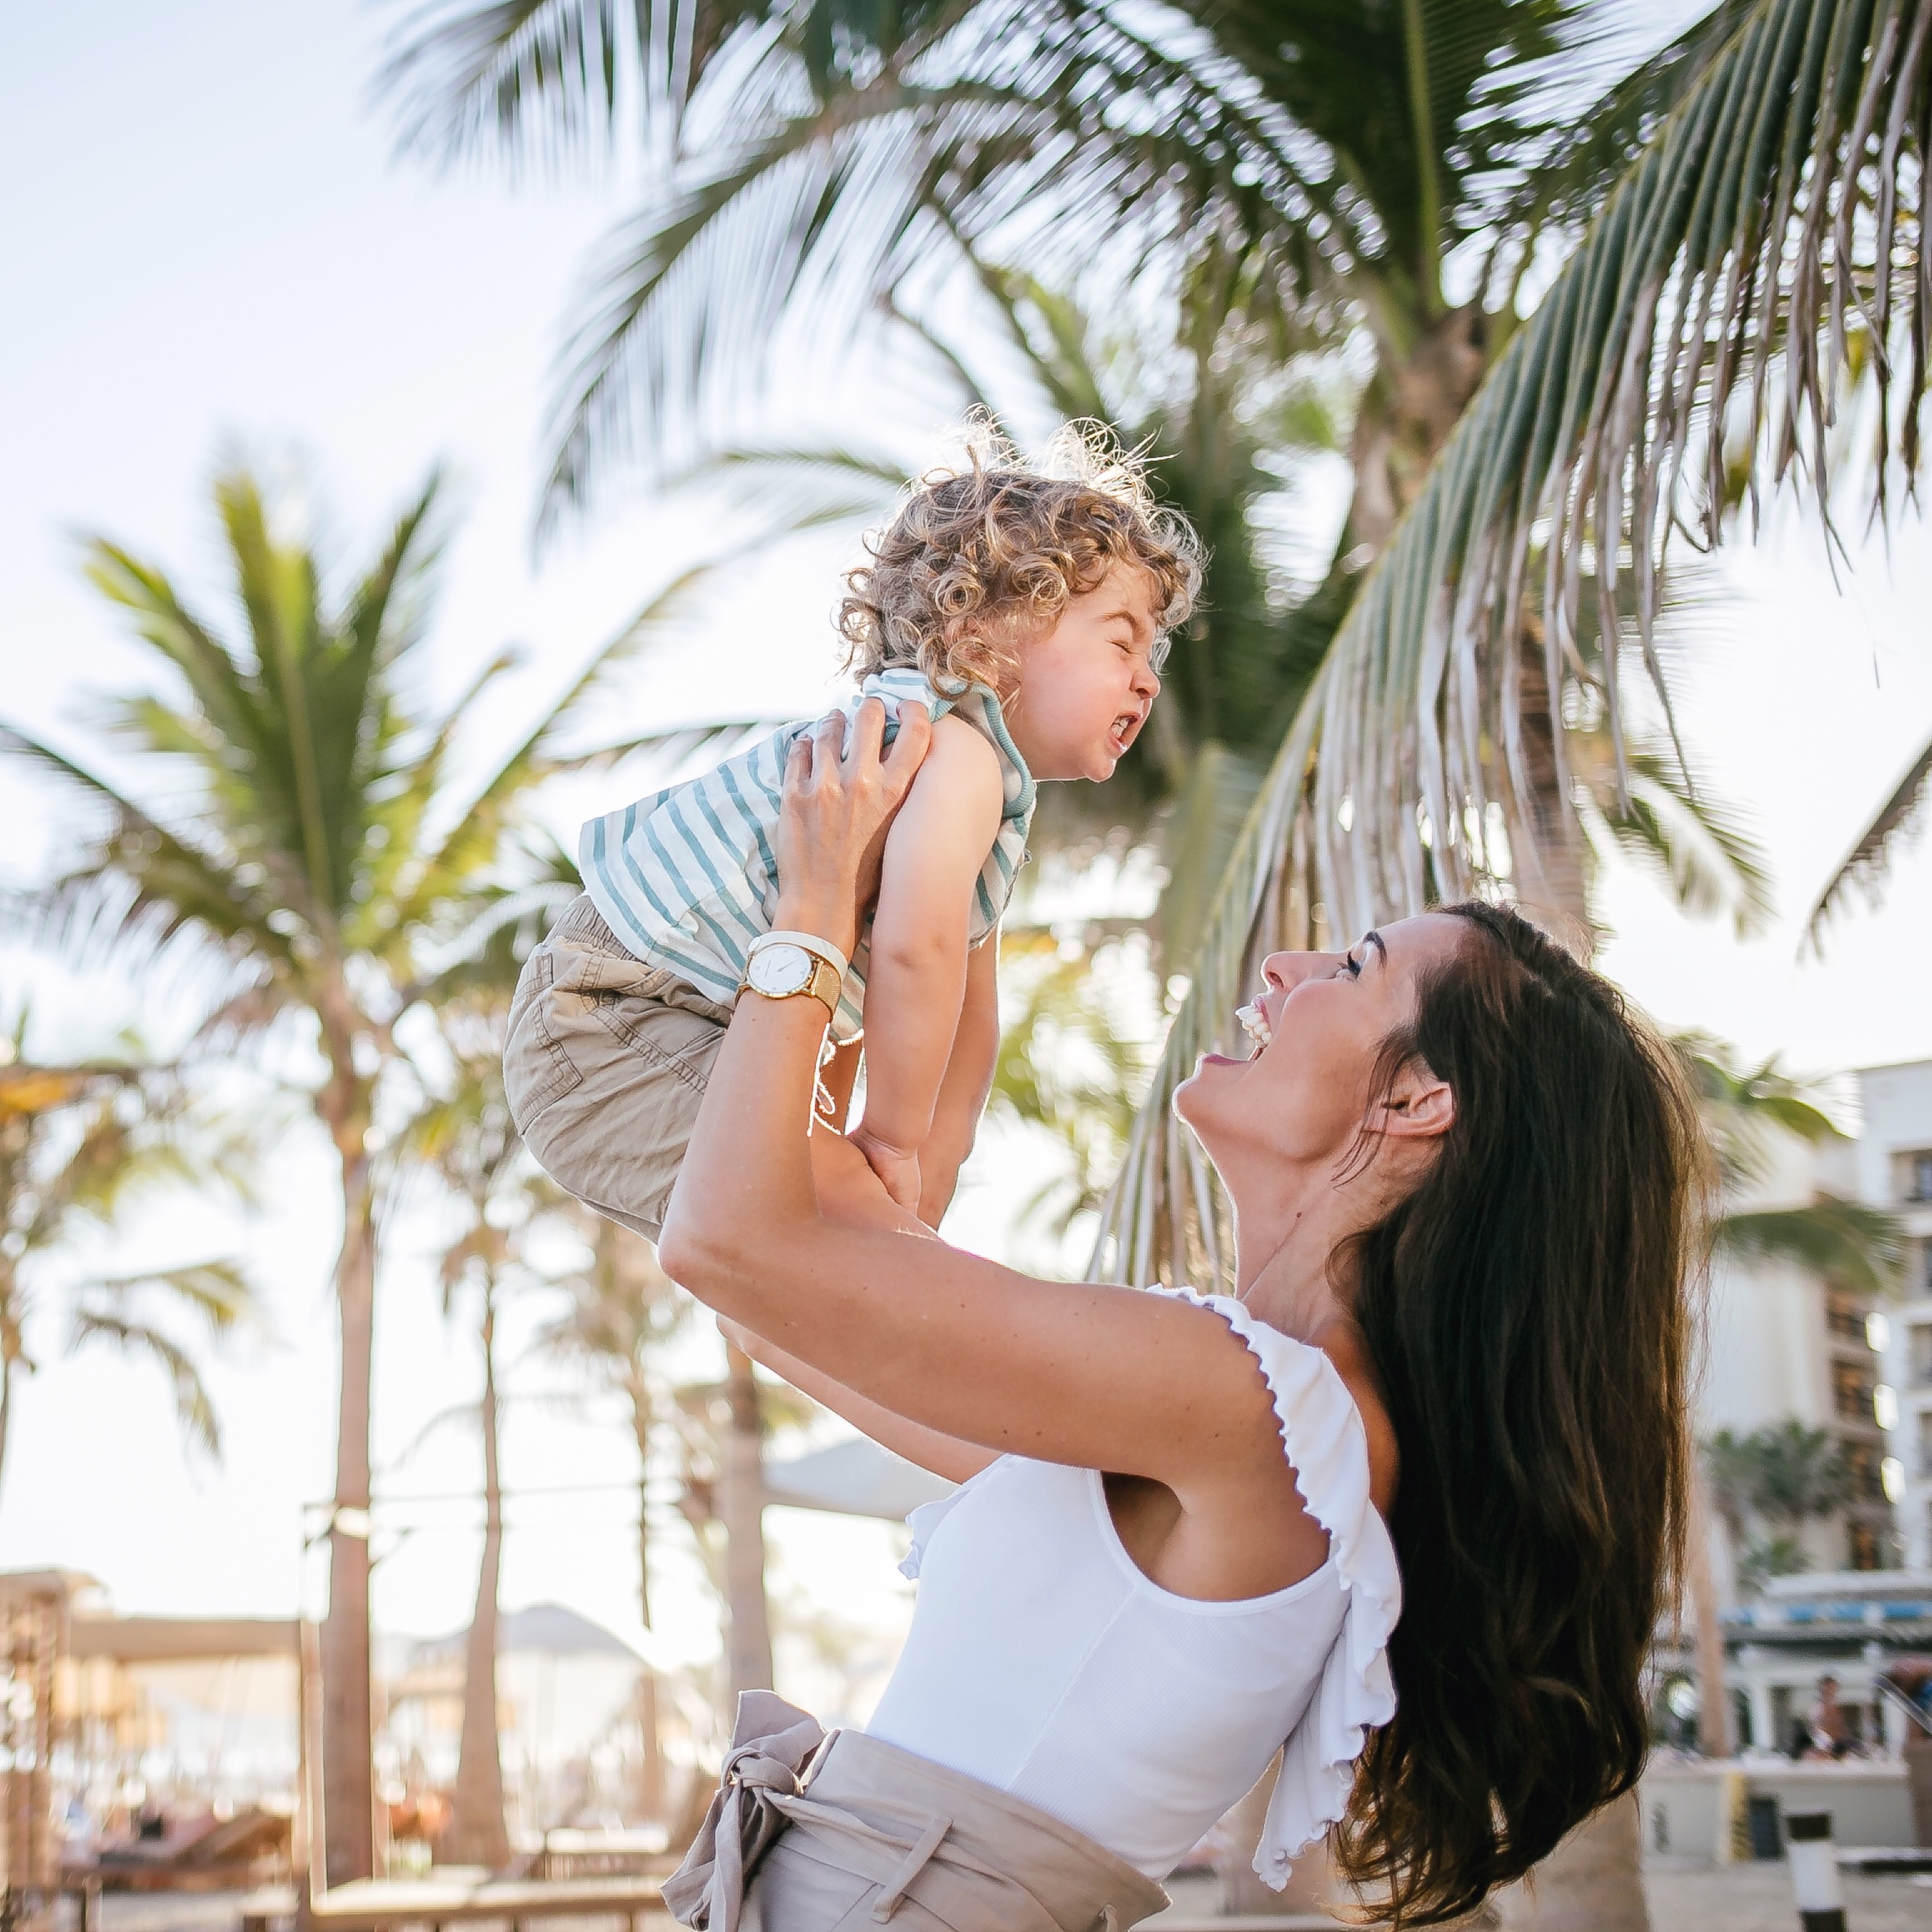 Mother’s Day Giveaway #1: Three Flytographer Photoshoots